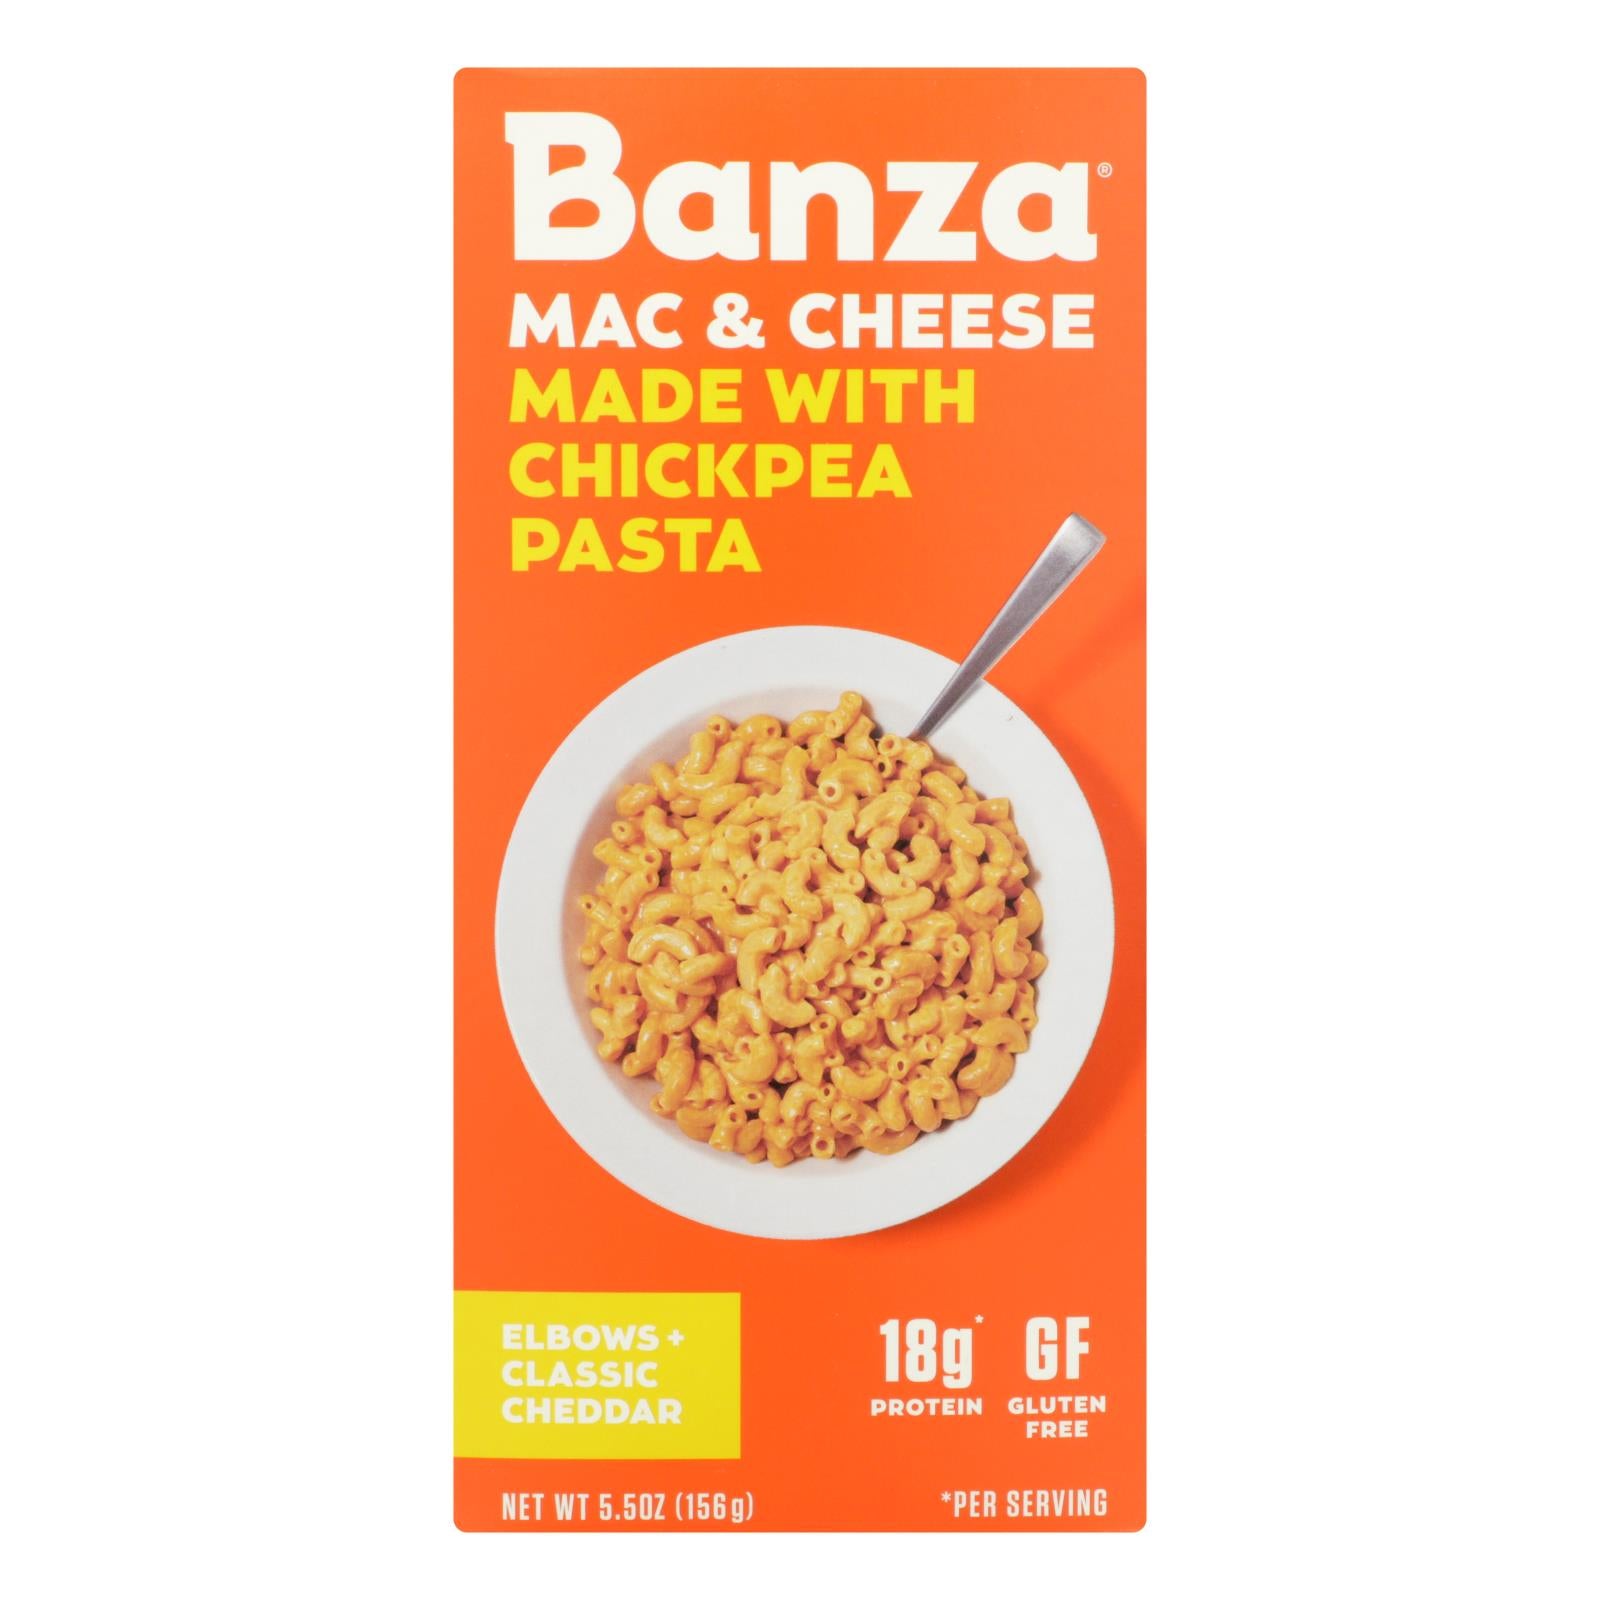 Banza, Banza - Chickpea Pasta Mac and Cheese - Classic Cheddar - Case of 6 - 5.5 oz. (Pack of 6)